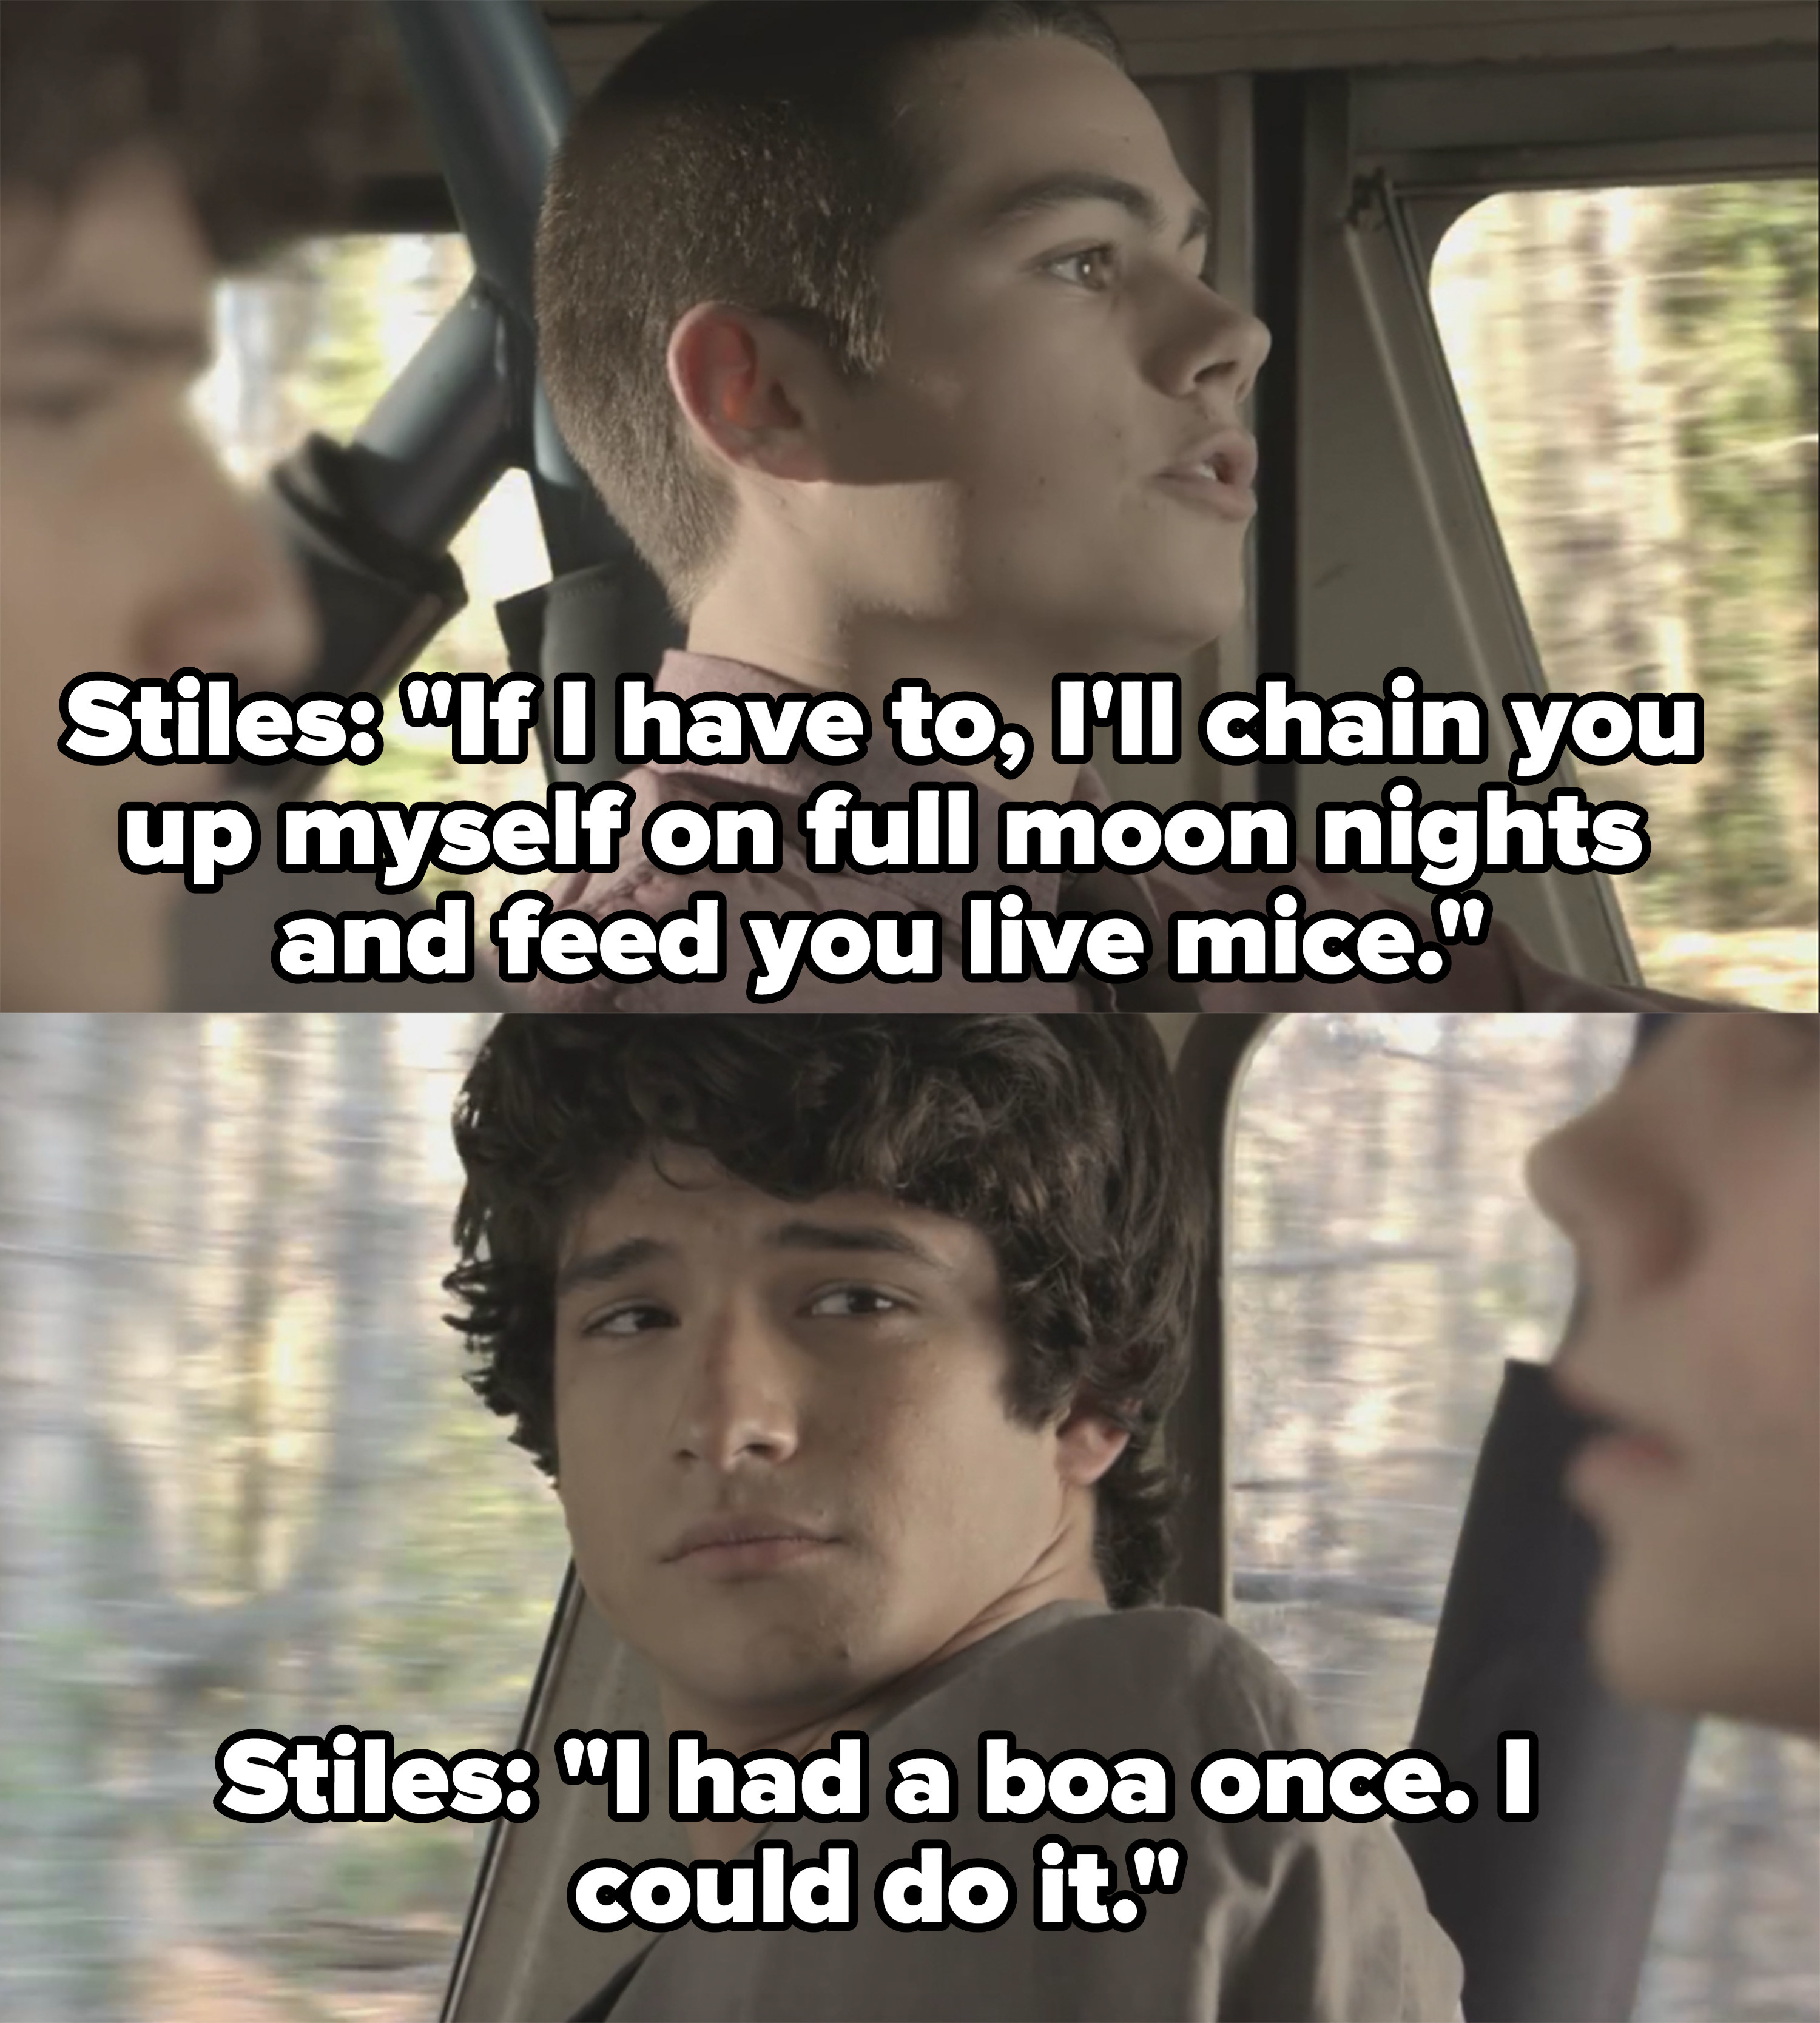 Stiles says he&#x27;ll chain Scott up and feed him mice on full moon nights if they have to